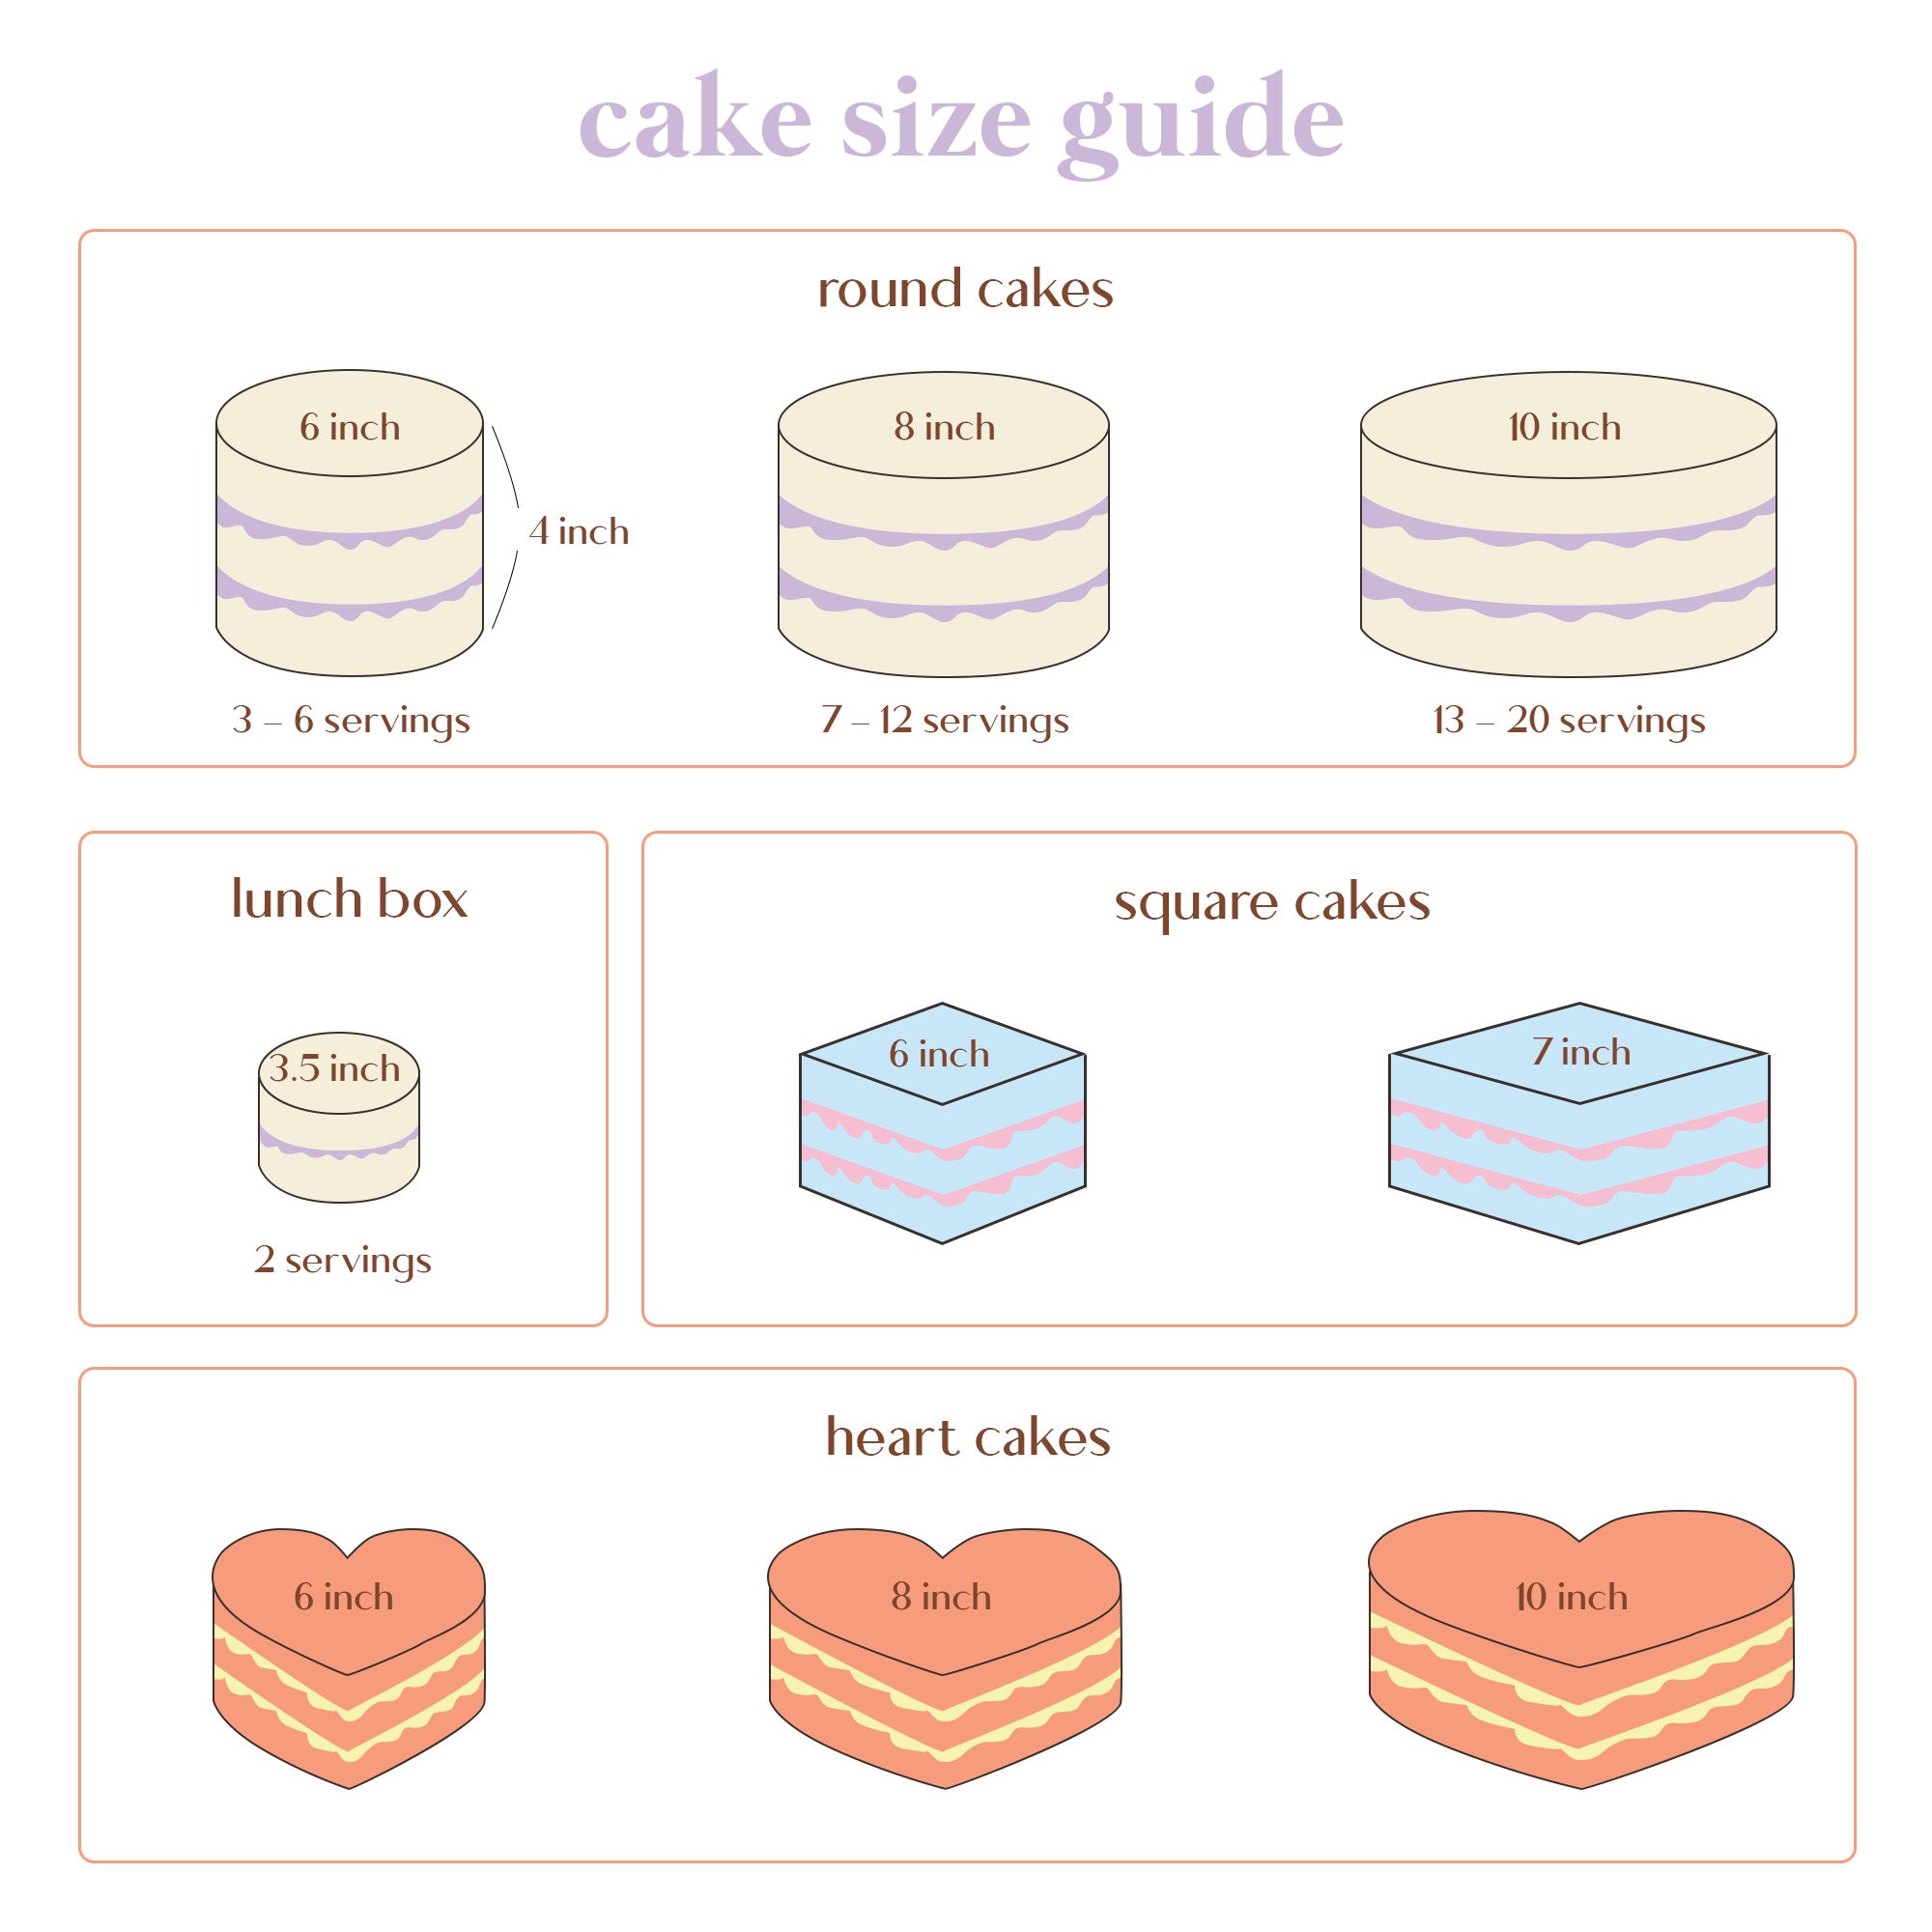 March 23, 2020 | Cakesafe